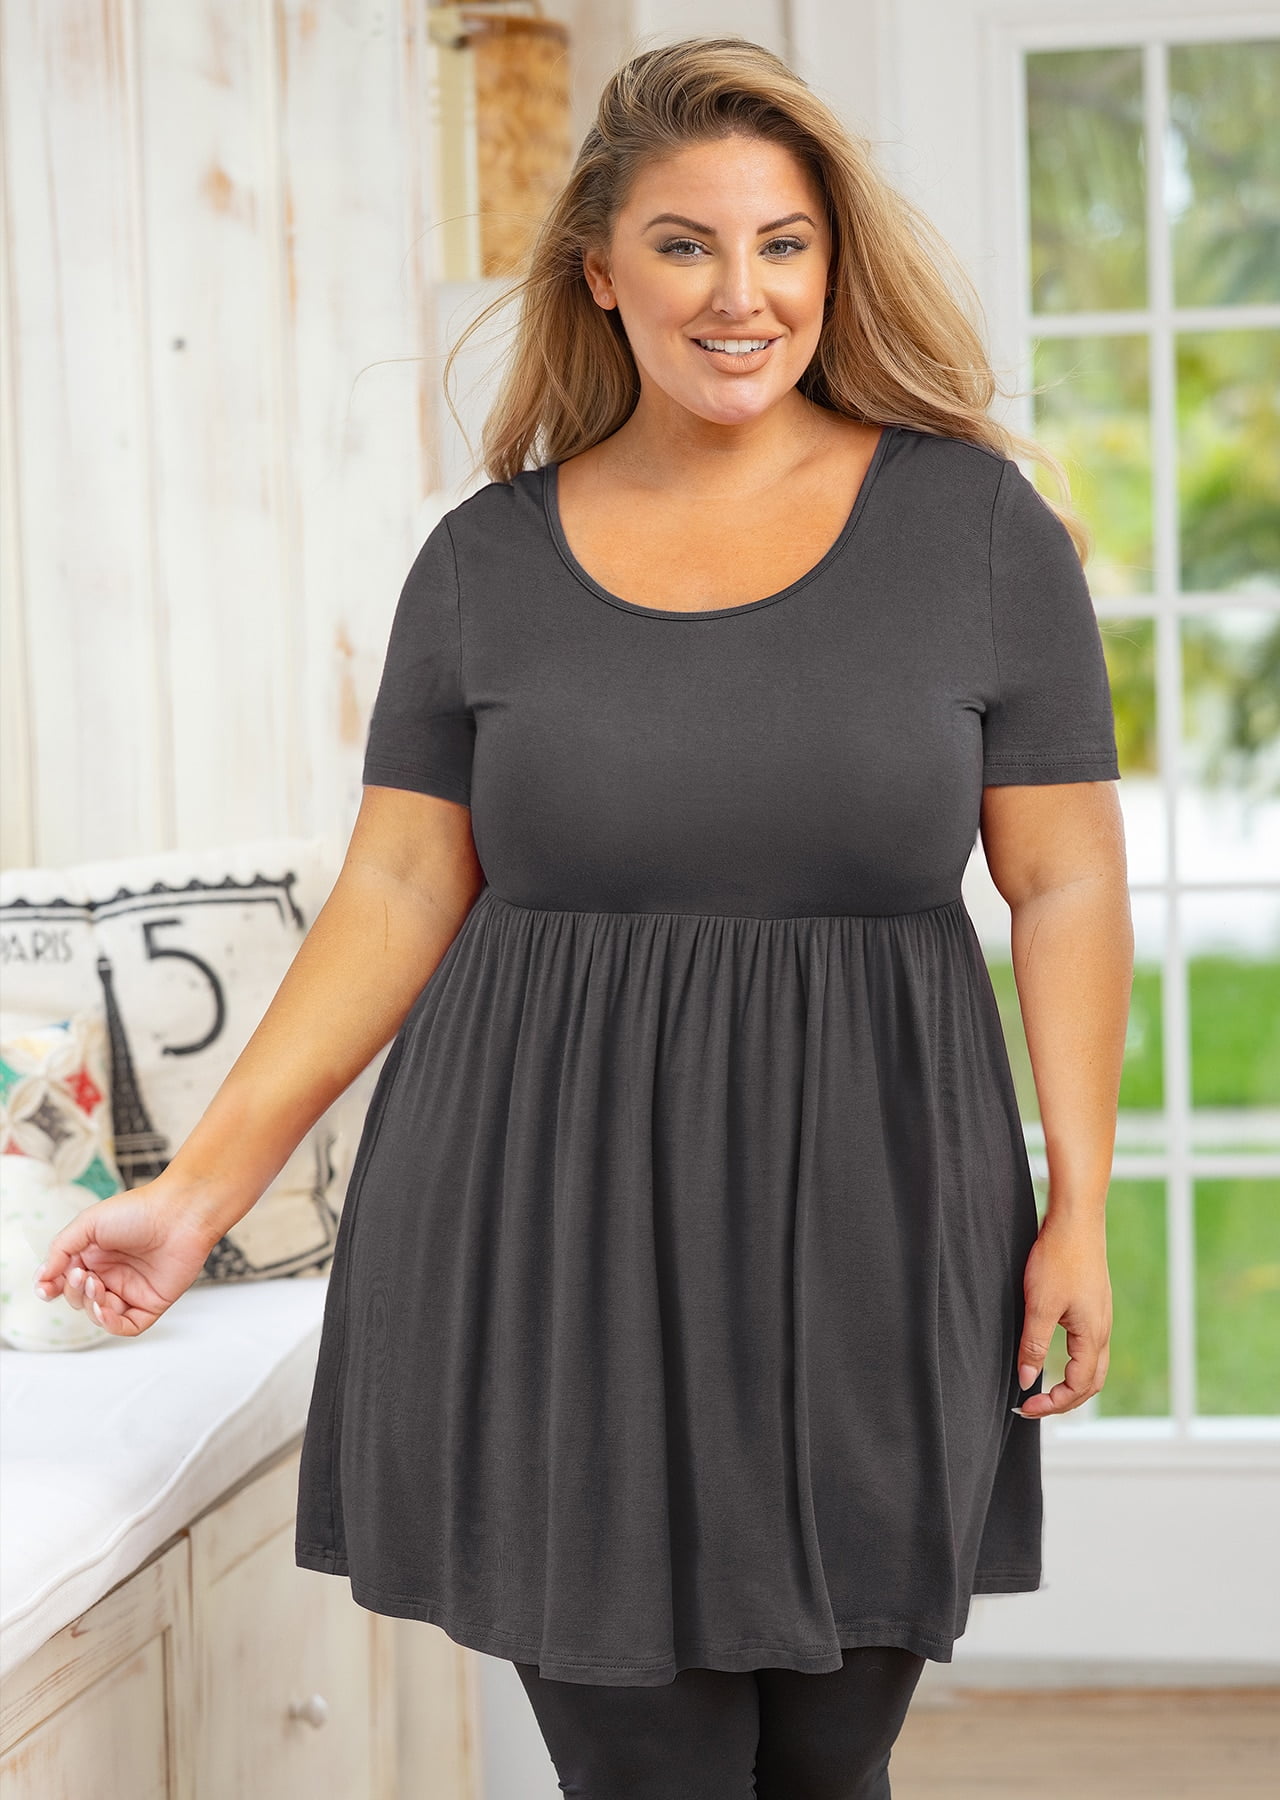 Disse Overholdelse af forbundet SHOWMALL Plus Size Tunic for Women Short Sleeves Dark Gray 4X Tops Scoop  Neck Clothes Summer Flowy Maternity Clothing Shirt - Walmart.com